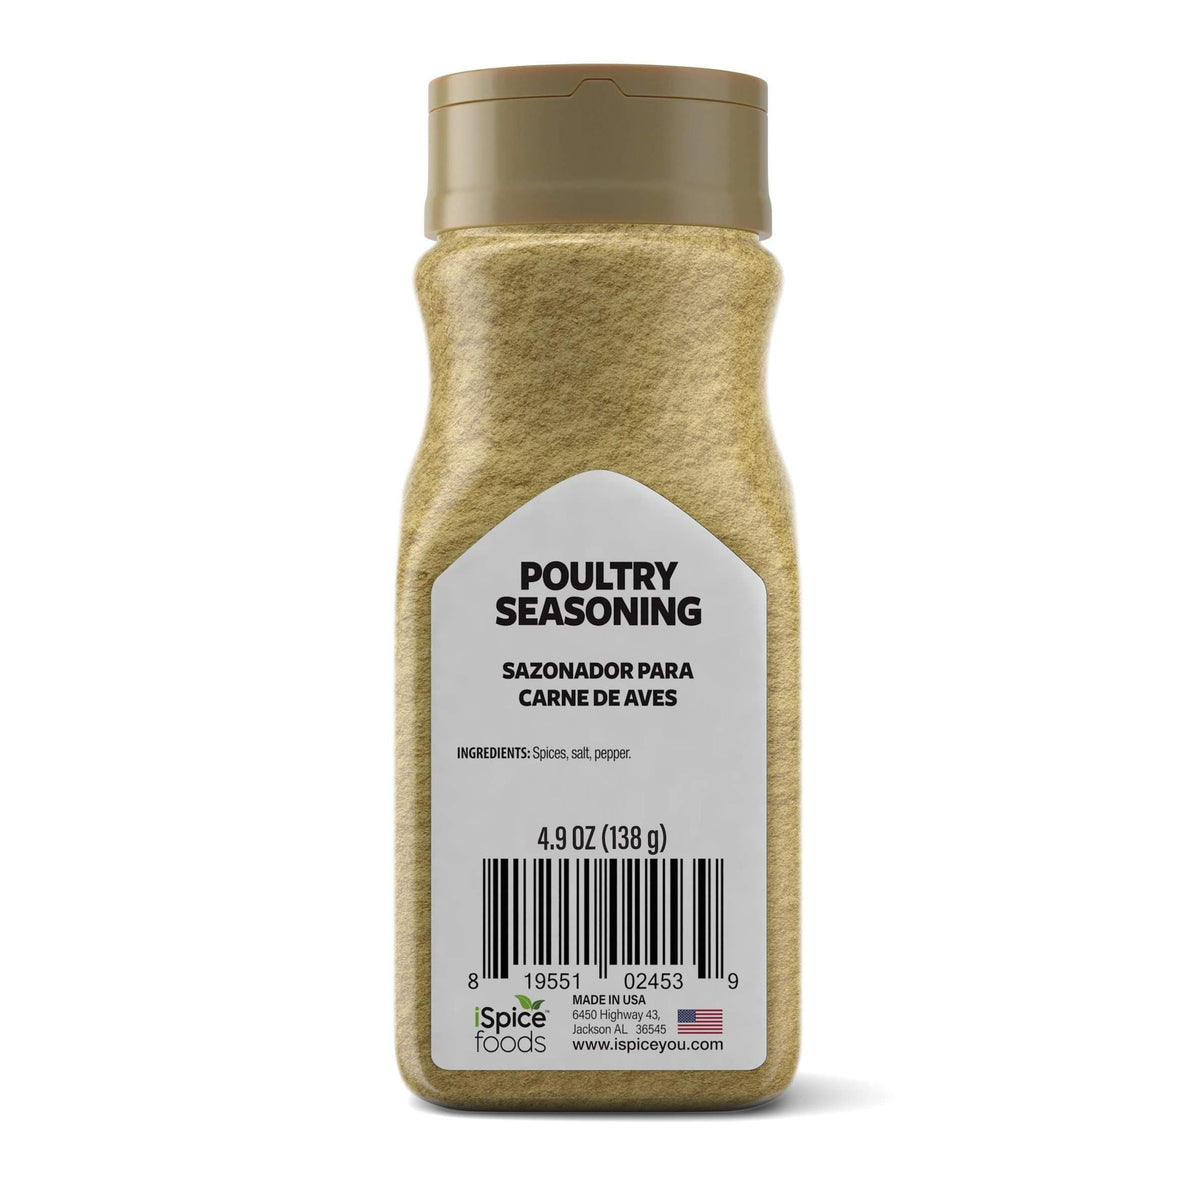 iSpice - Poultry Seasoning 4.9oz (138g)